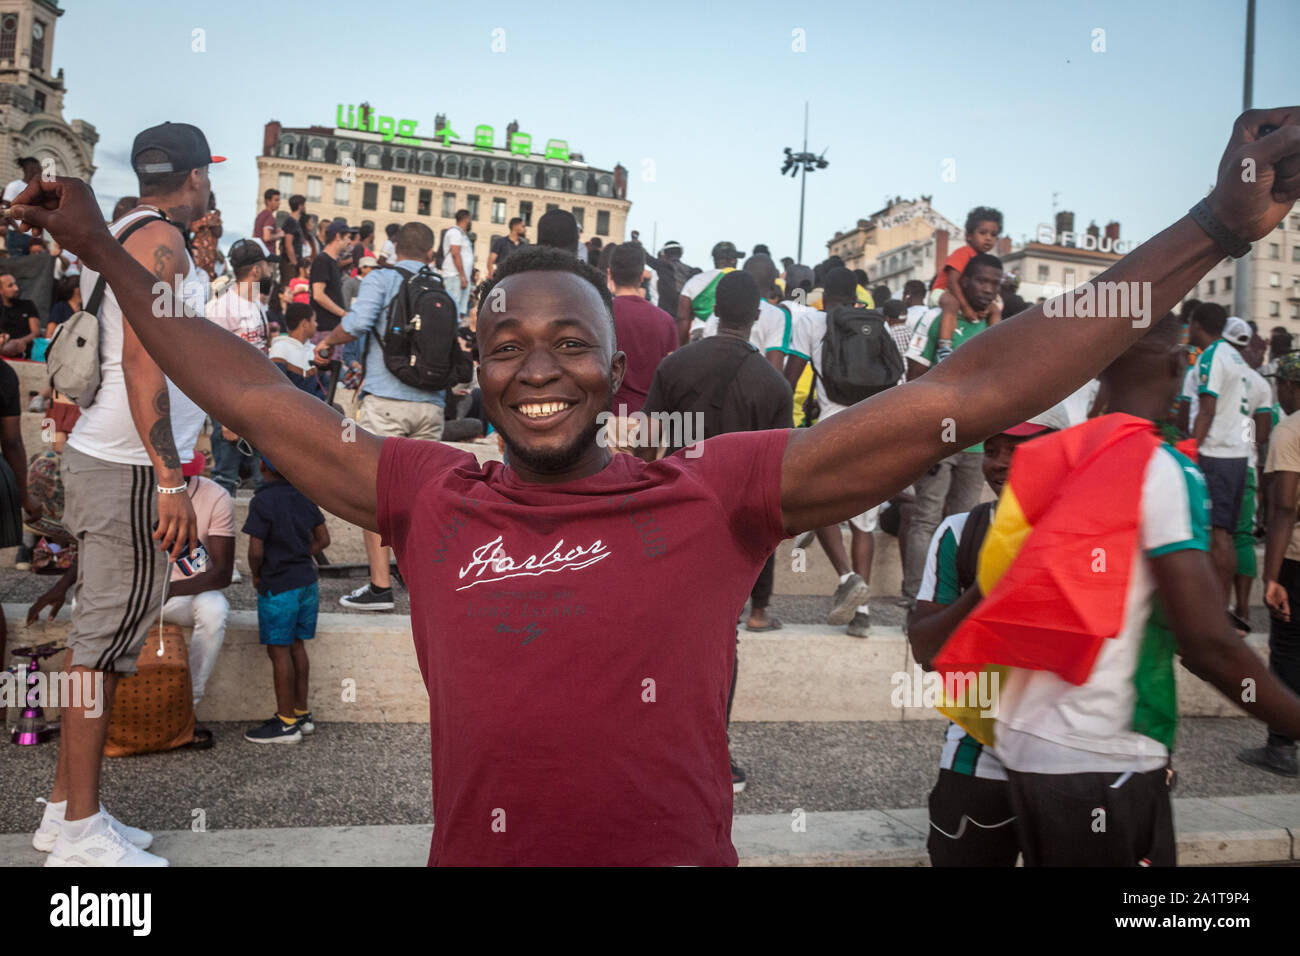 LYON, FRANCE - JULY 14, 2019: Senegal supporter, a black man, cheering and smiling celebrating the qualification of the Senegal Football team for the Stock Photo